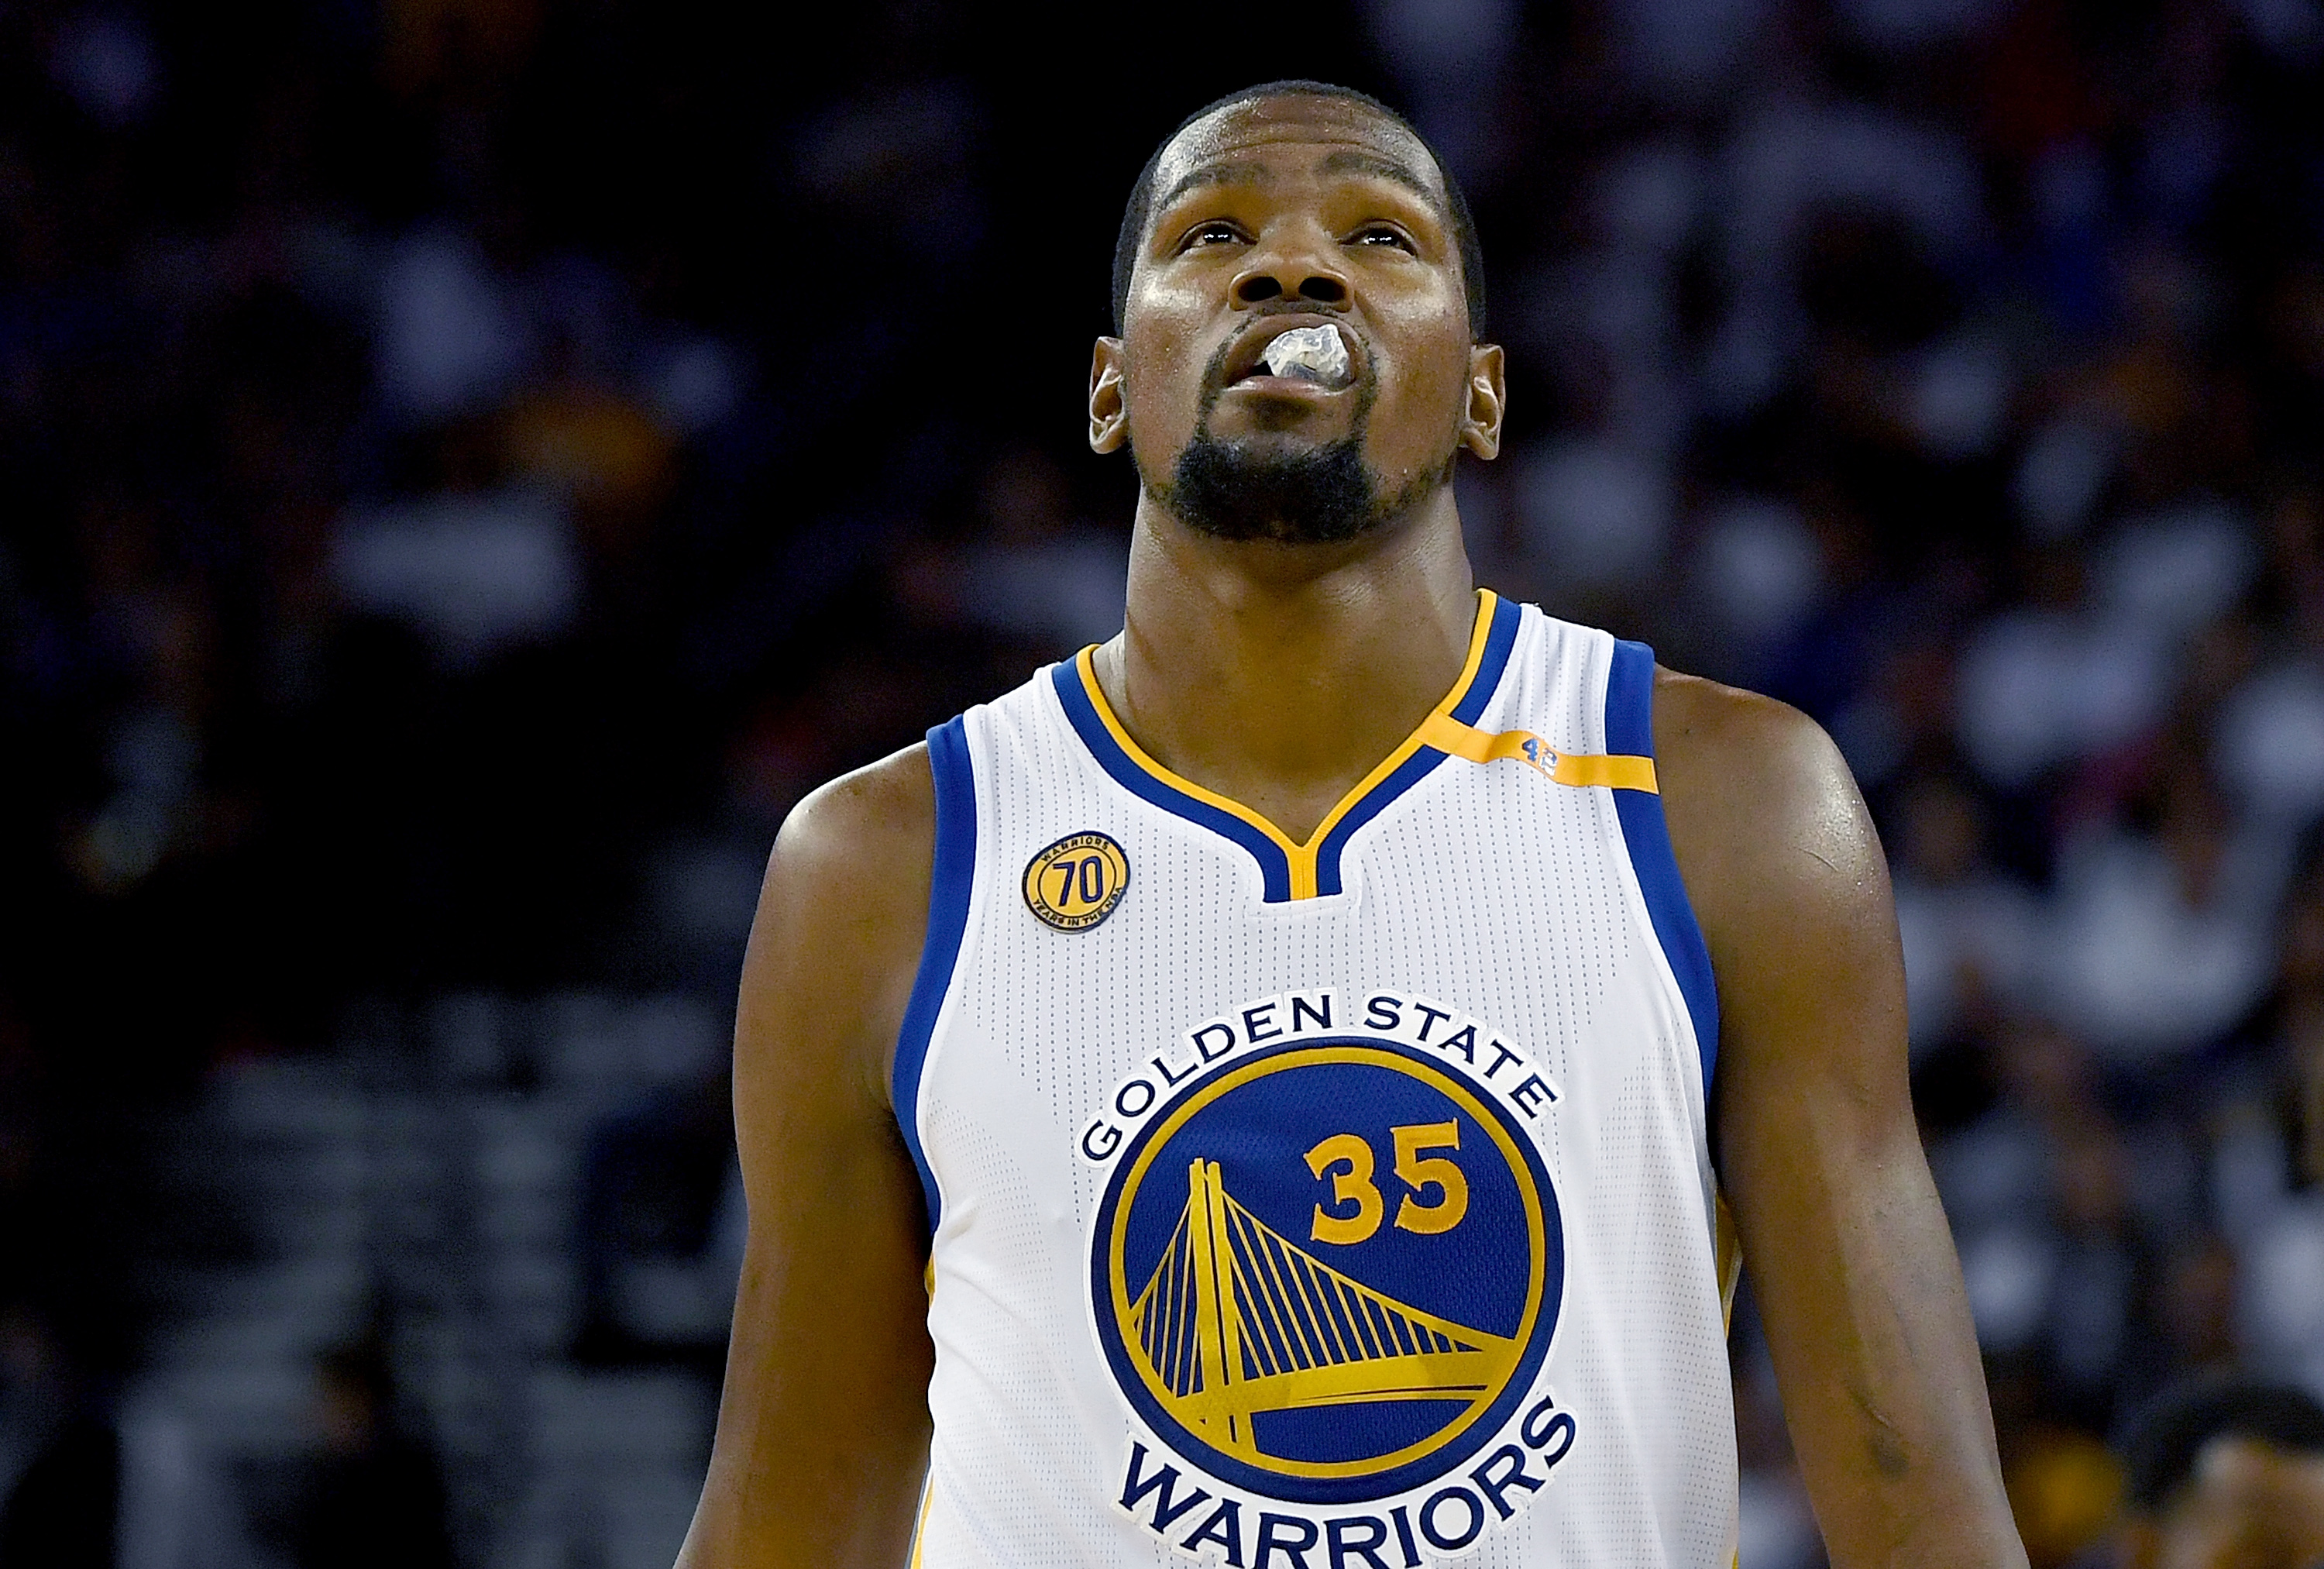 OAKLAND, CA - OCTOBER 25: Kevin Durant #35 of the Golden State Warriors looks on against the San Antonio Spurs during the third quarter in an NBA basketball game at ORACLE Arena on October 25, 2016 Oakland, California. NOTE TO USER: User expressly acknowledges and agrees that, by downloading and or using this photograph, User is consenting to the terms and conditions of the Getty Images License Agreement.   Thearon W. Henderson/Getty Images/AFP